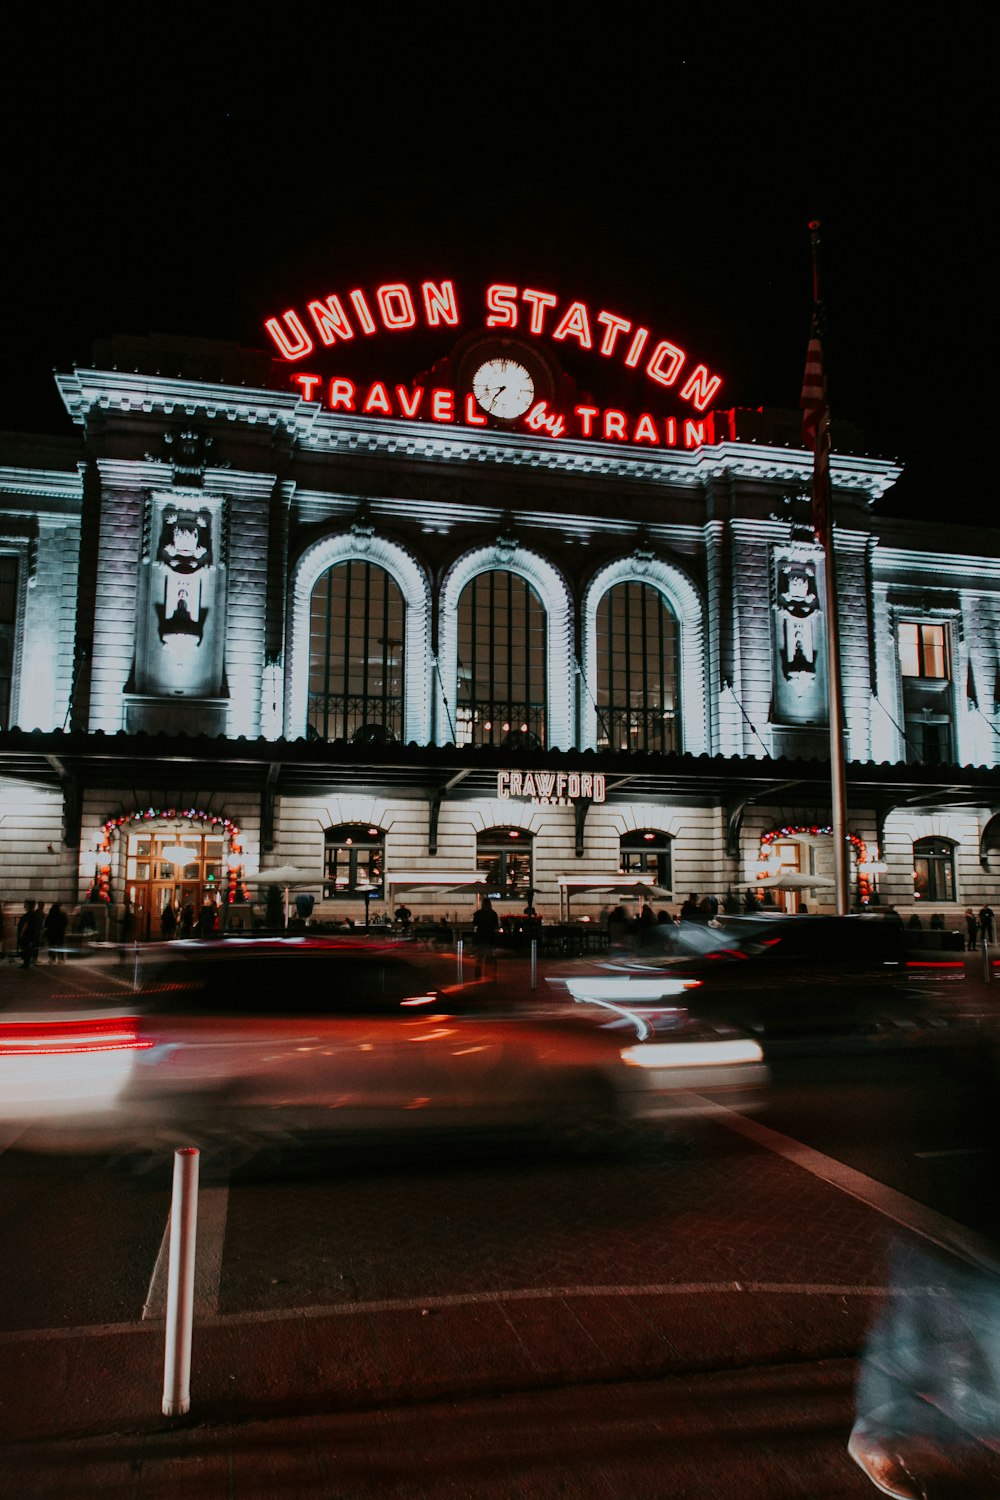 Union Station travel by train building photo at night